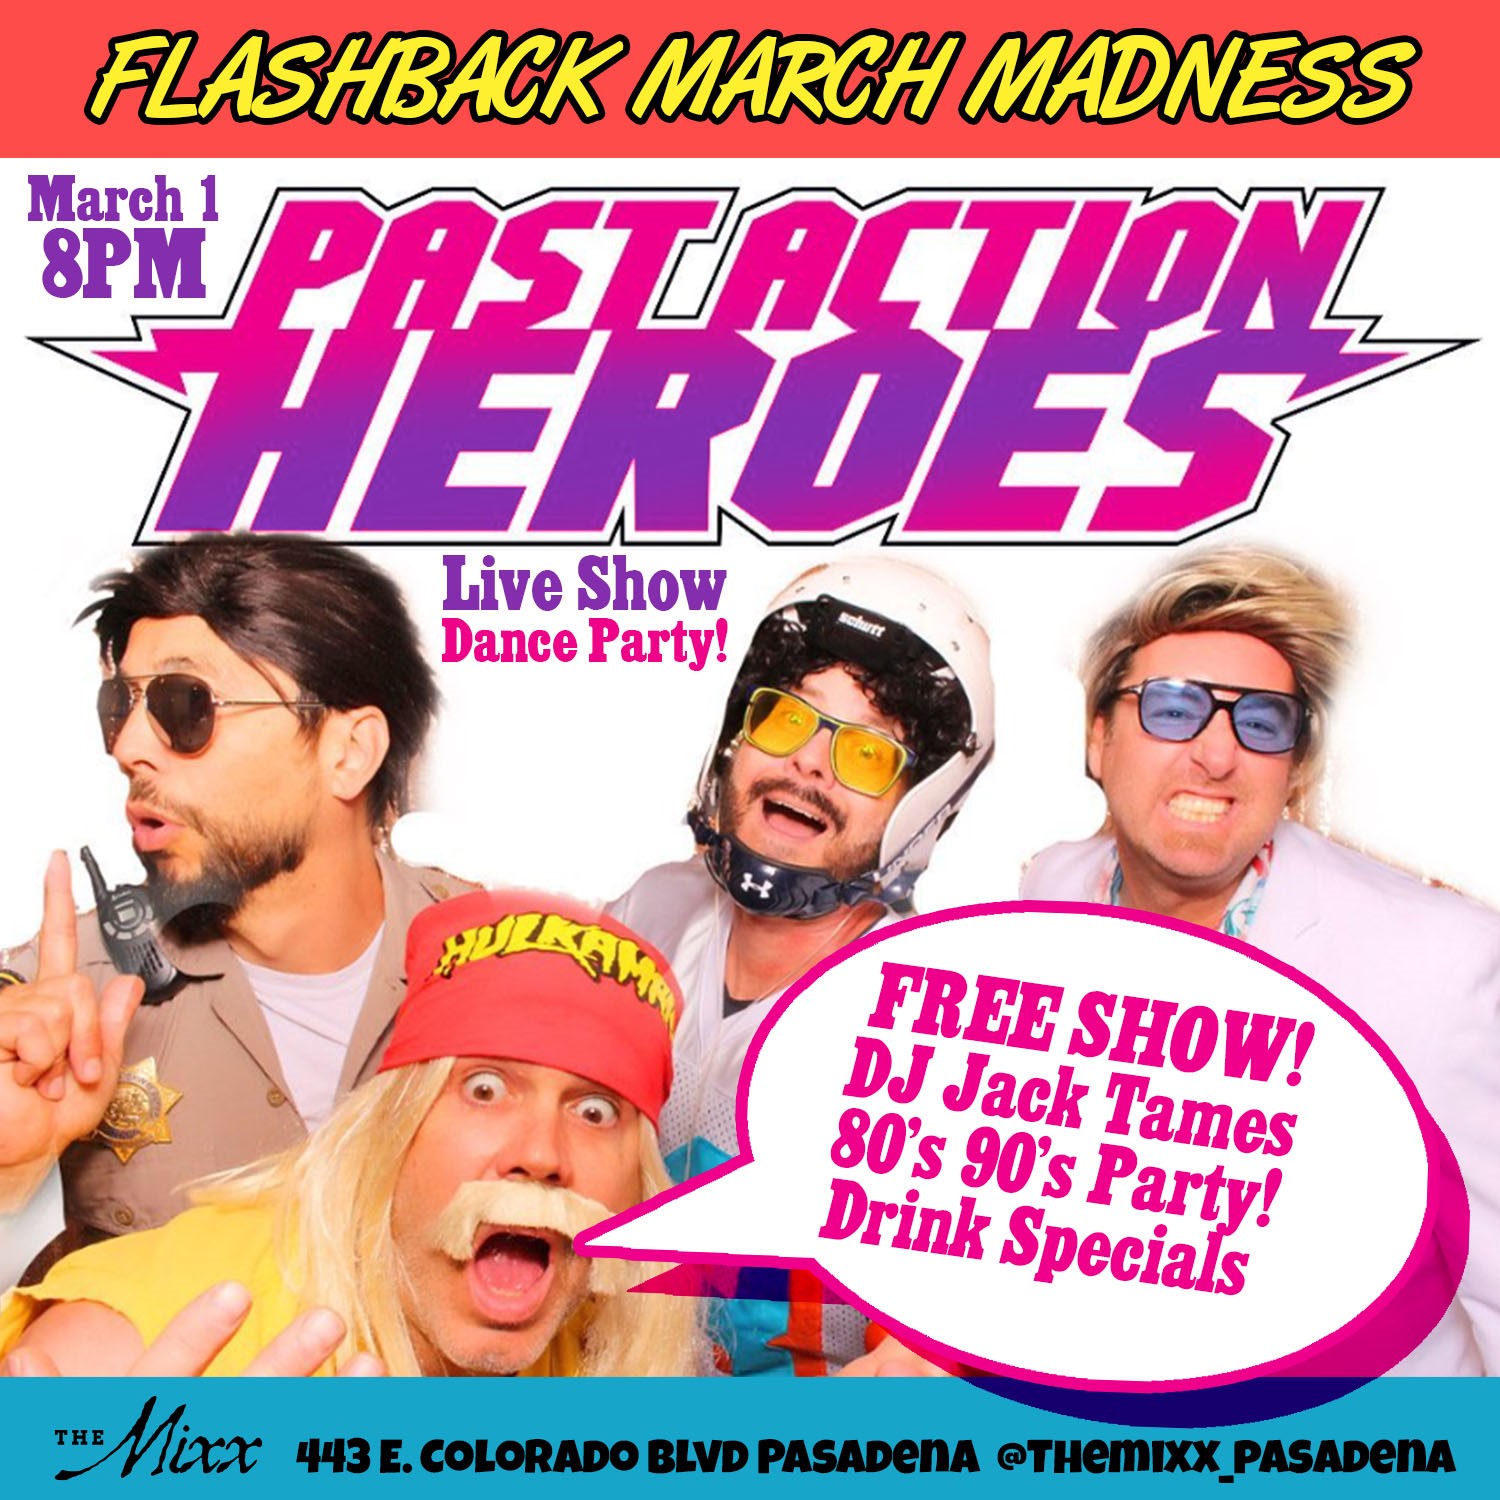 You are currently viewing PAST ACTION HEROES – FREE MARCH MADNESS FLASHBACK SHOW!